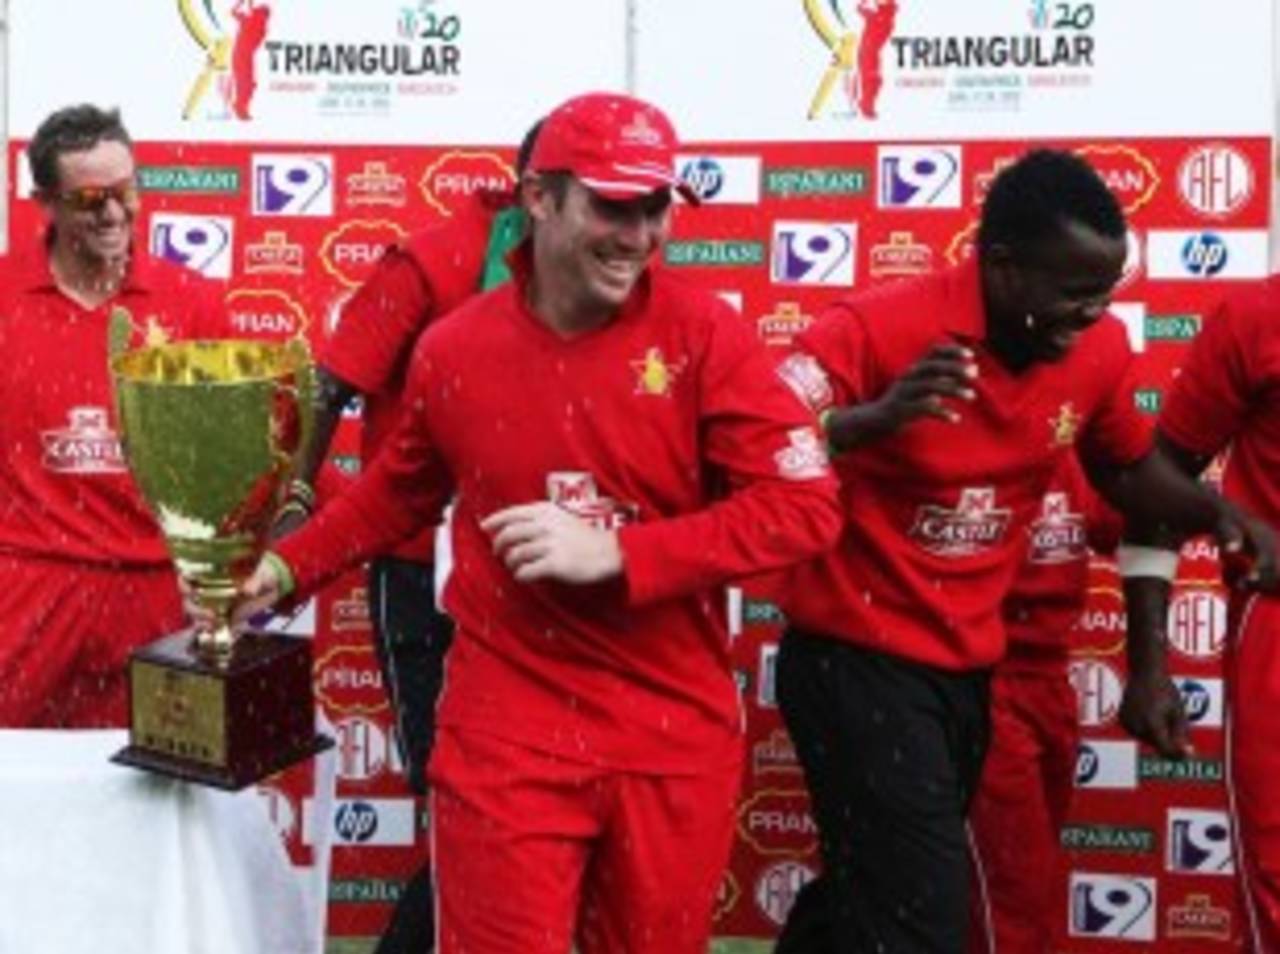 The highlight of Zimbabwe's year was the win over South Africa in the unofficial T20 triangular series&nbsp;&nbsp;&bull;&nbsp;&nbsp;Associated Press